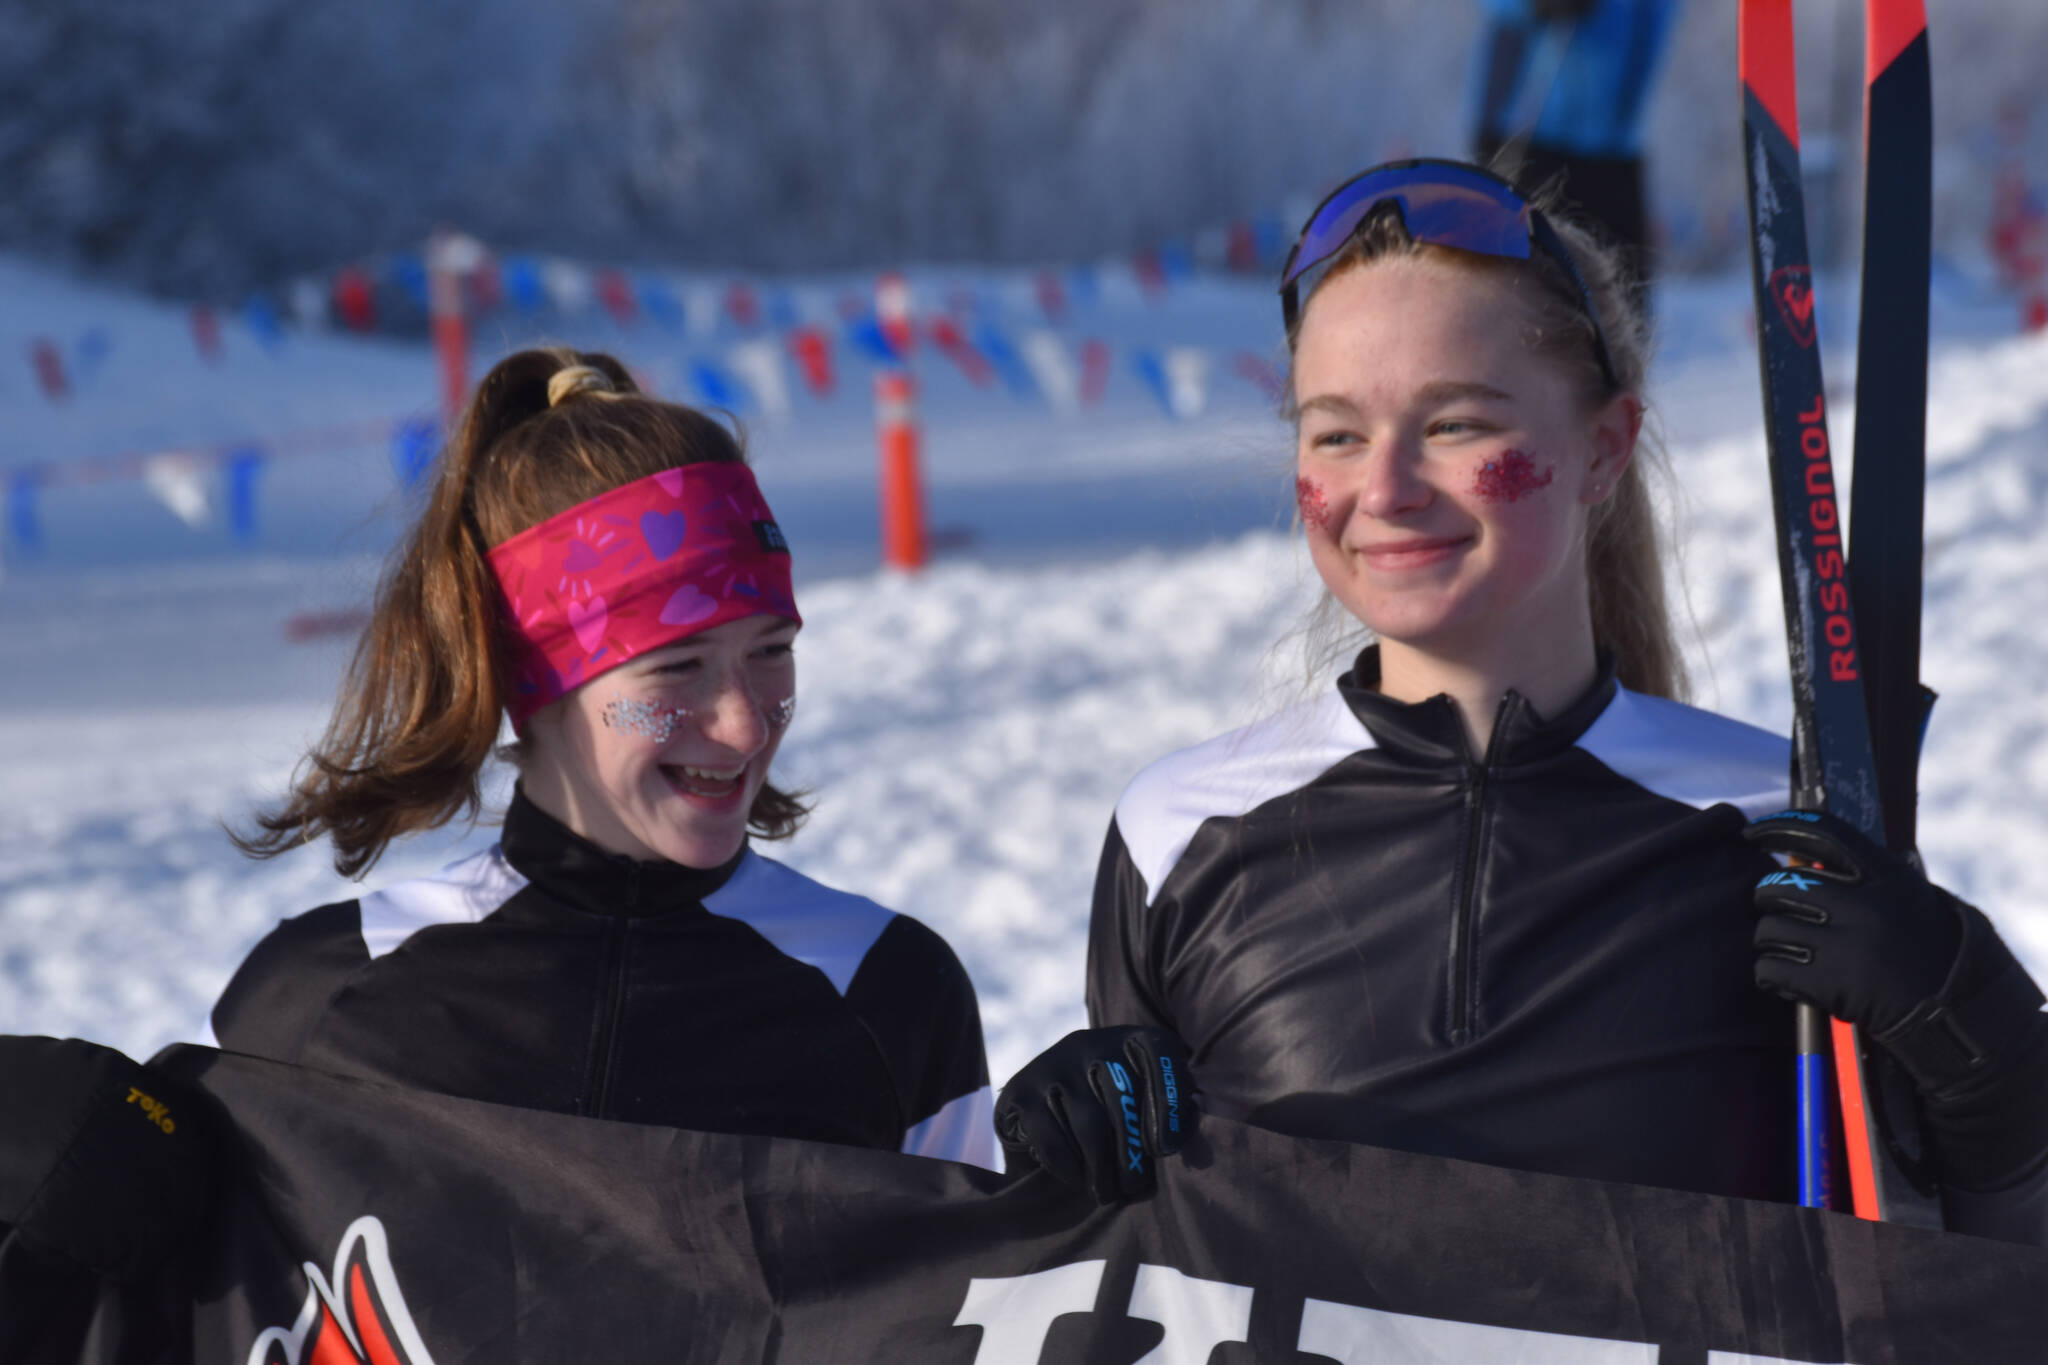 Kenai Central skiers Mya Taylor and Emily Moss celebrate finishing the girls 4x3.5-kilometer relay, their last race at the ASAA State Nordic Ski Championships at Kincaid Park in Anchorage, Alaska, on Saturday, Feb. 25, 2023. (Jake Dye/Peninsula Clarion)